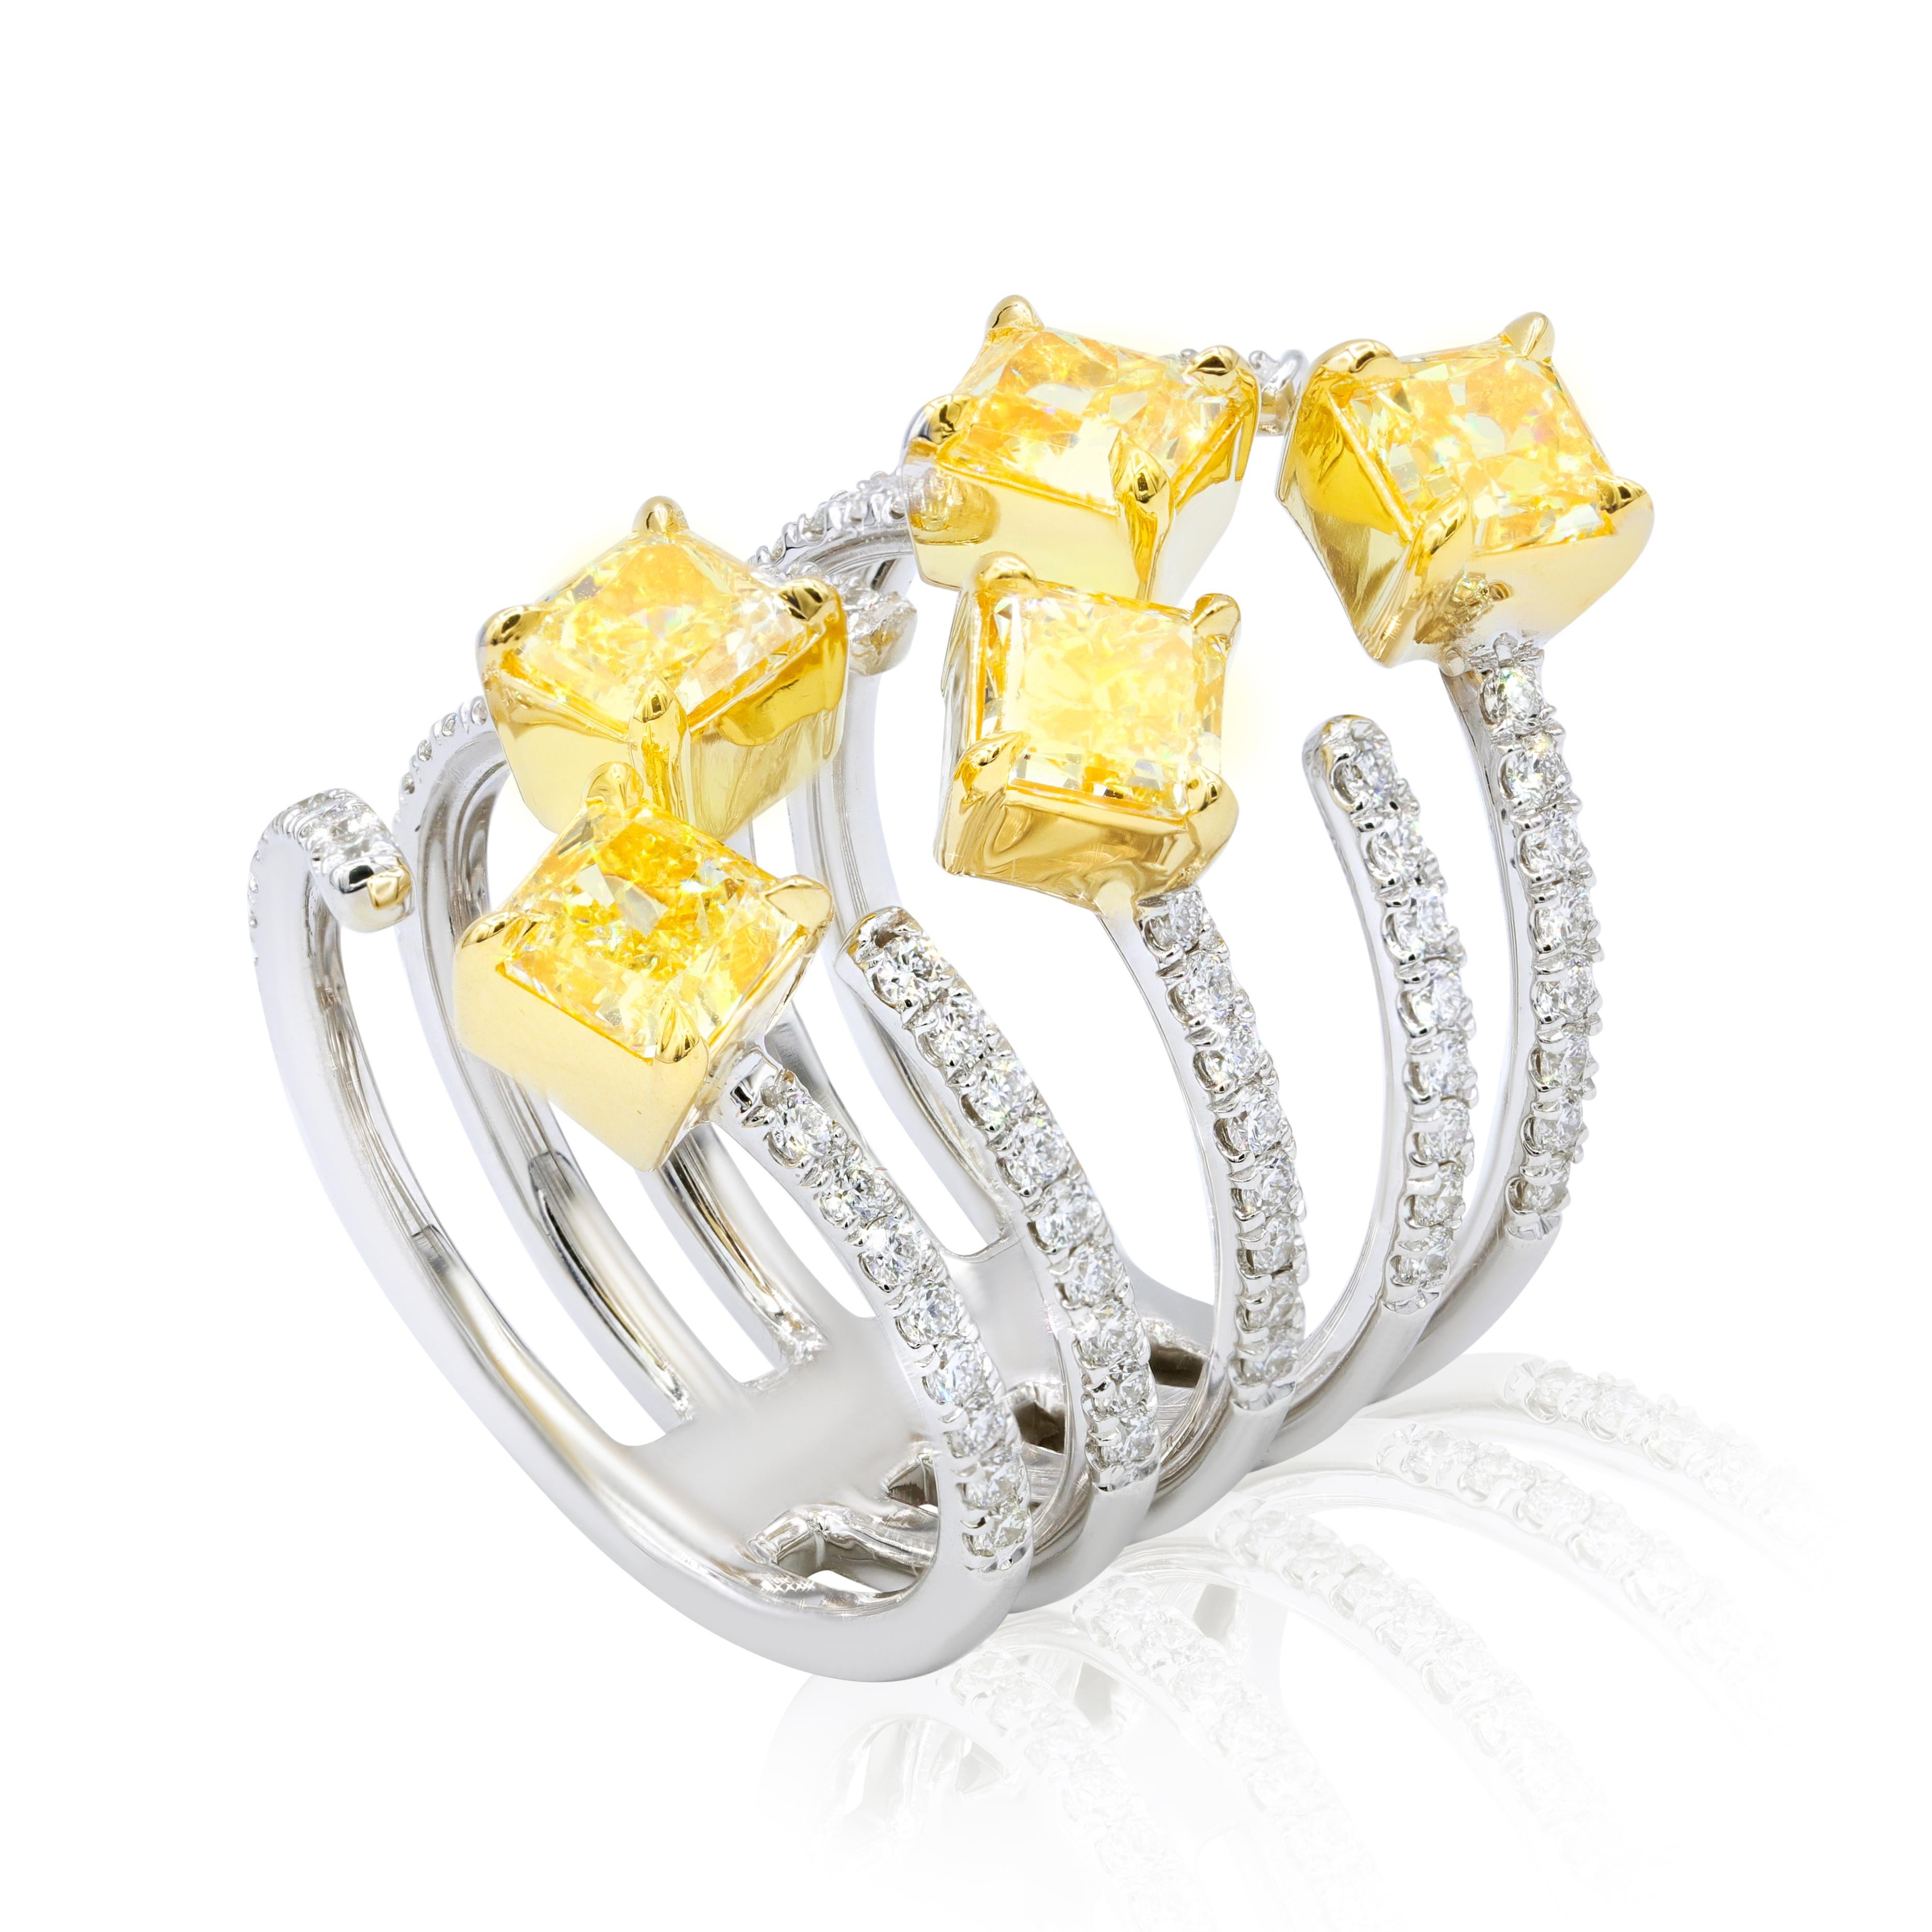 18KT two tone multi shaped fancy yellow diamond ring with 3.54 carats of five yellow diamonds and 0.90 carats micro pave diamonds.
Ring size: 6.5
Can be resized to any finger size.

This product comes with a certificate of appraisal
This product